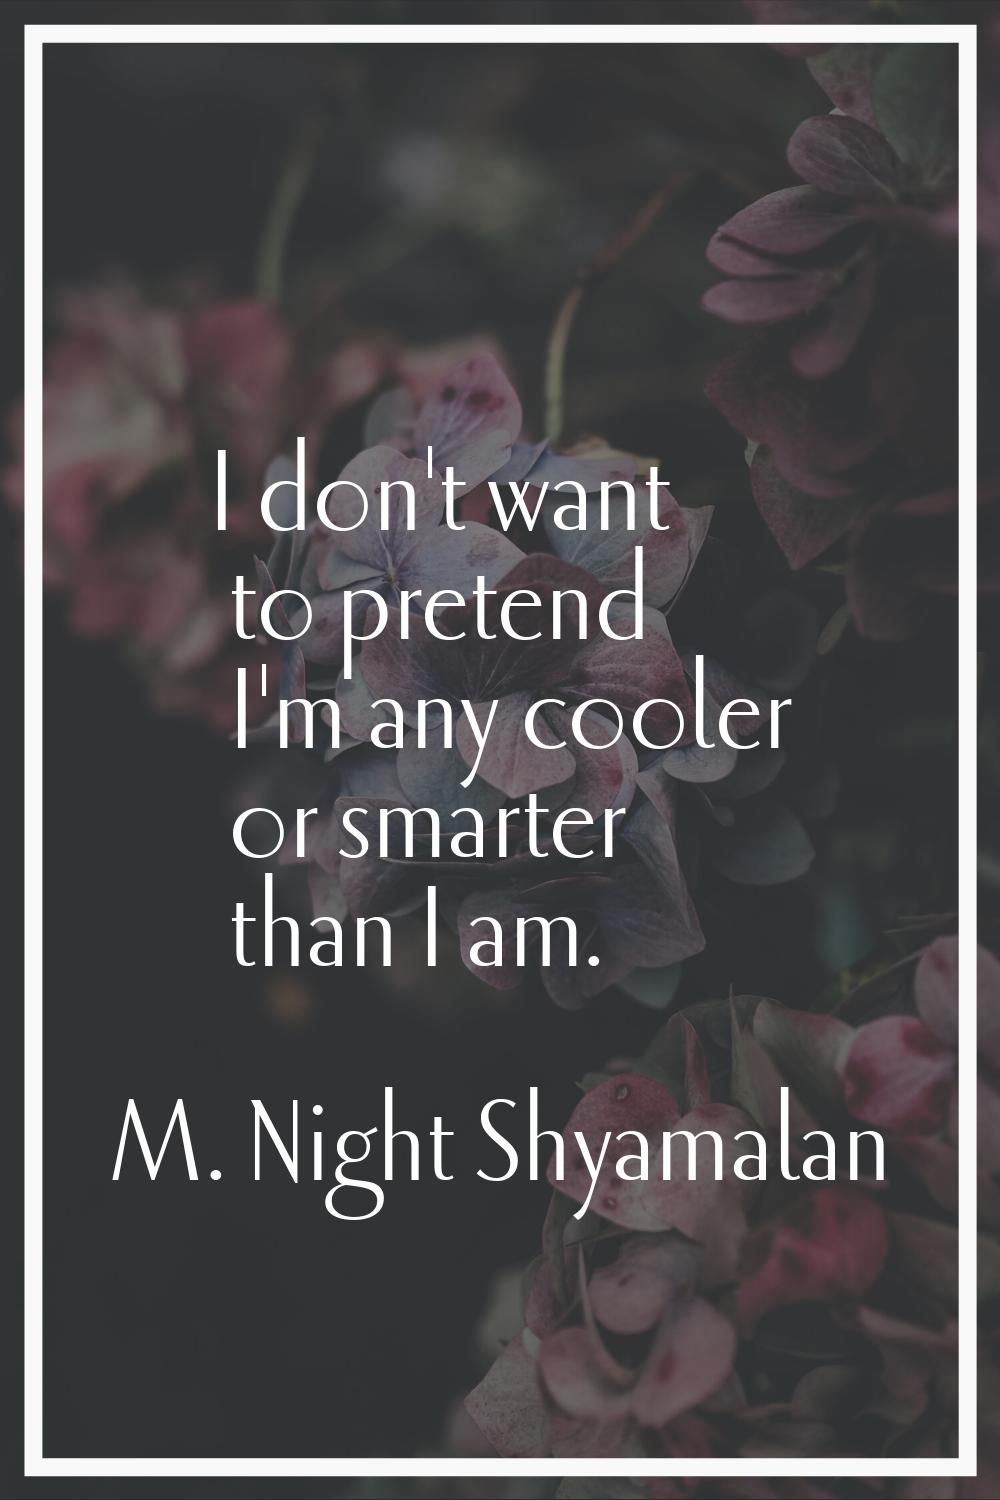 I don't want to pretend I'm any cooler or smarter than I am.